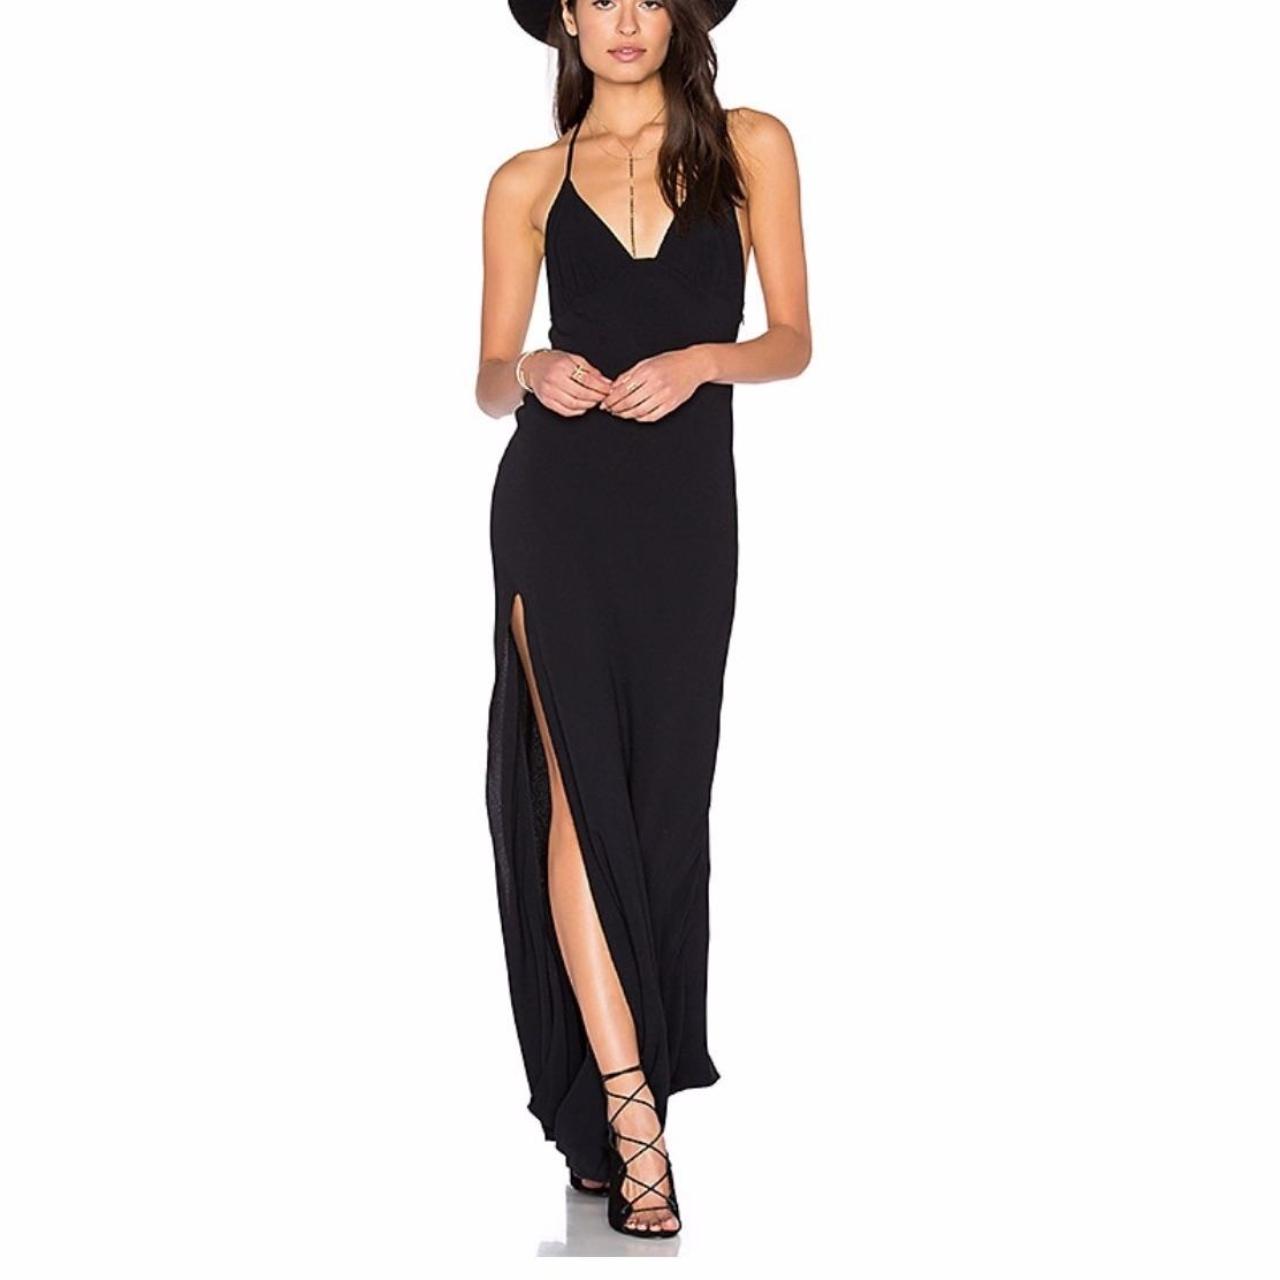 Classic black halter maxi dress with side slit by... - Depop